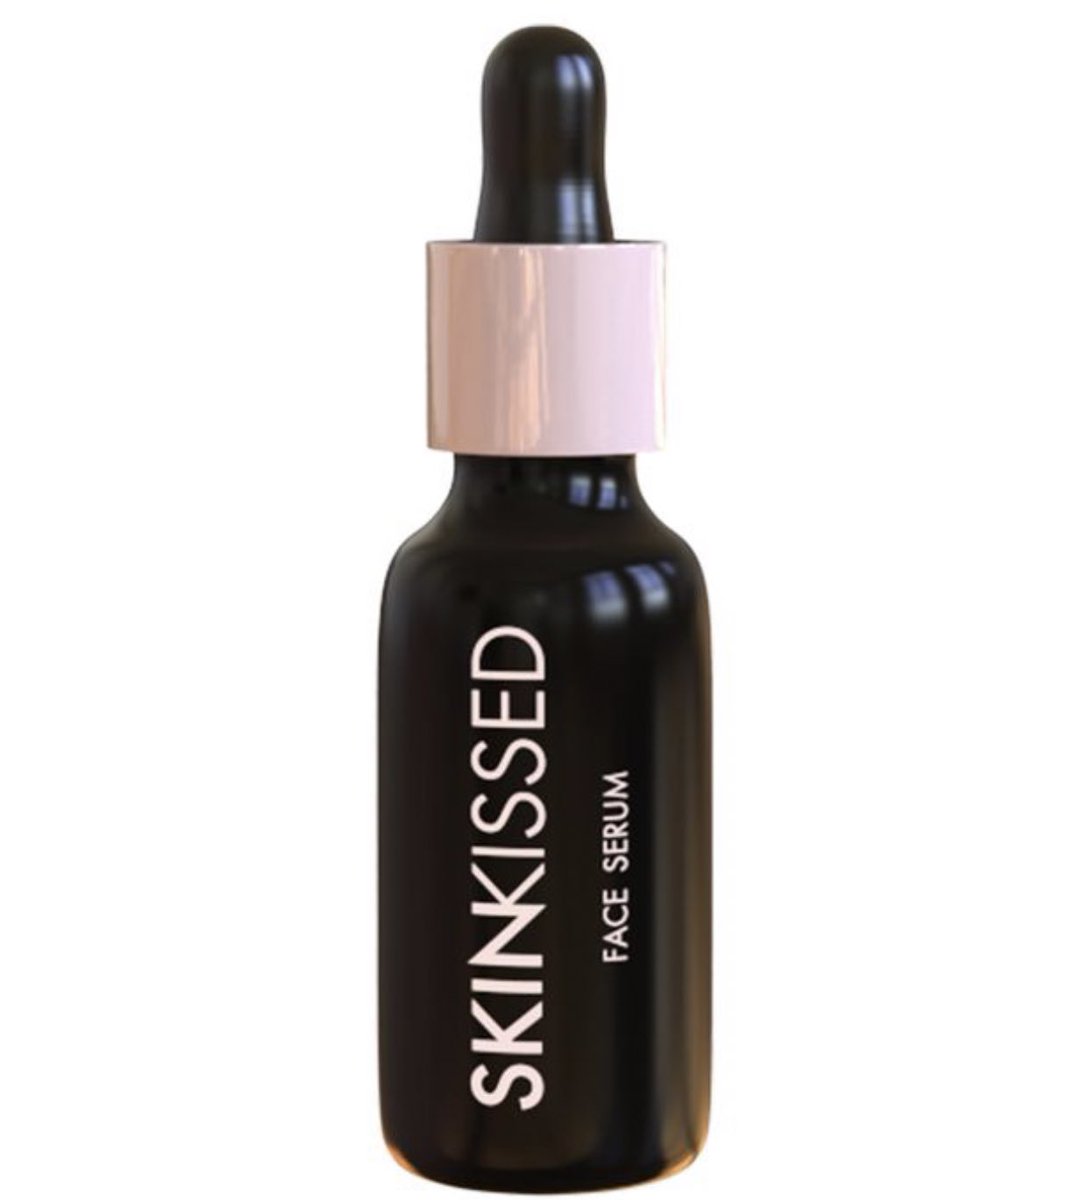 SUNKISSED flawless serum is 100% vegan, non-comedogenic, contains Vitamin C and hyaluronic acid work in tandem to achieve clearer, healthier and nourished skin. Excellent at clearing acne scars